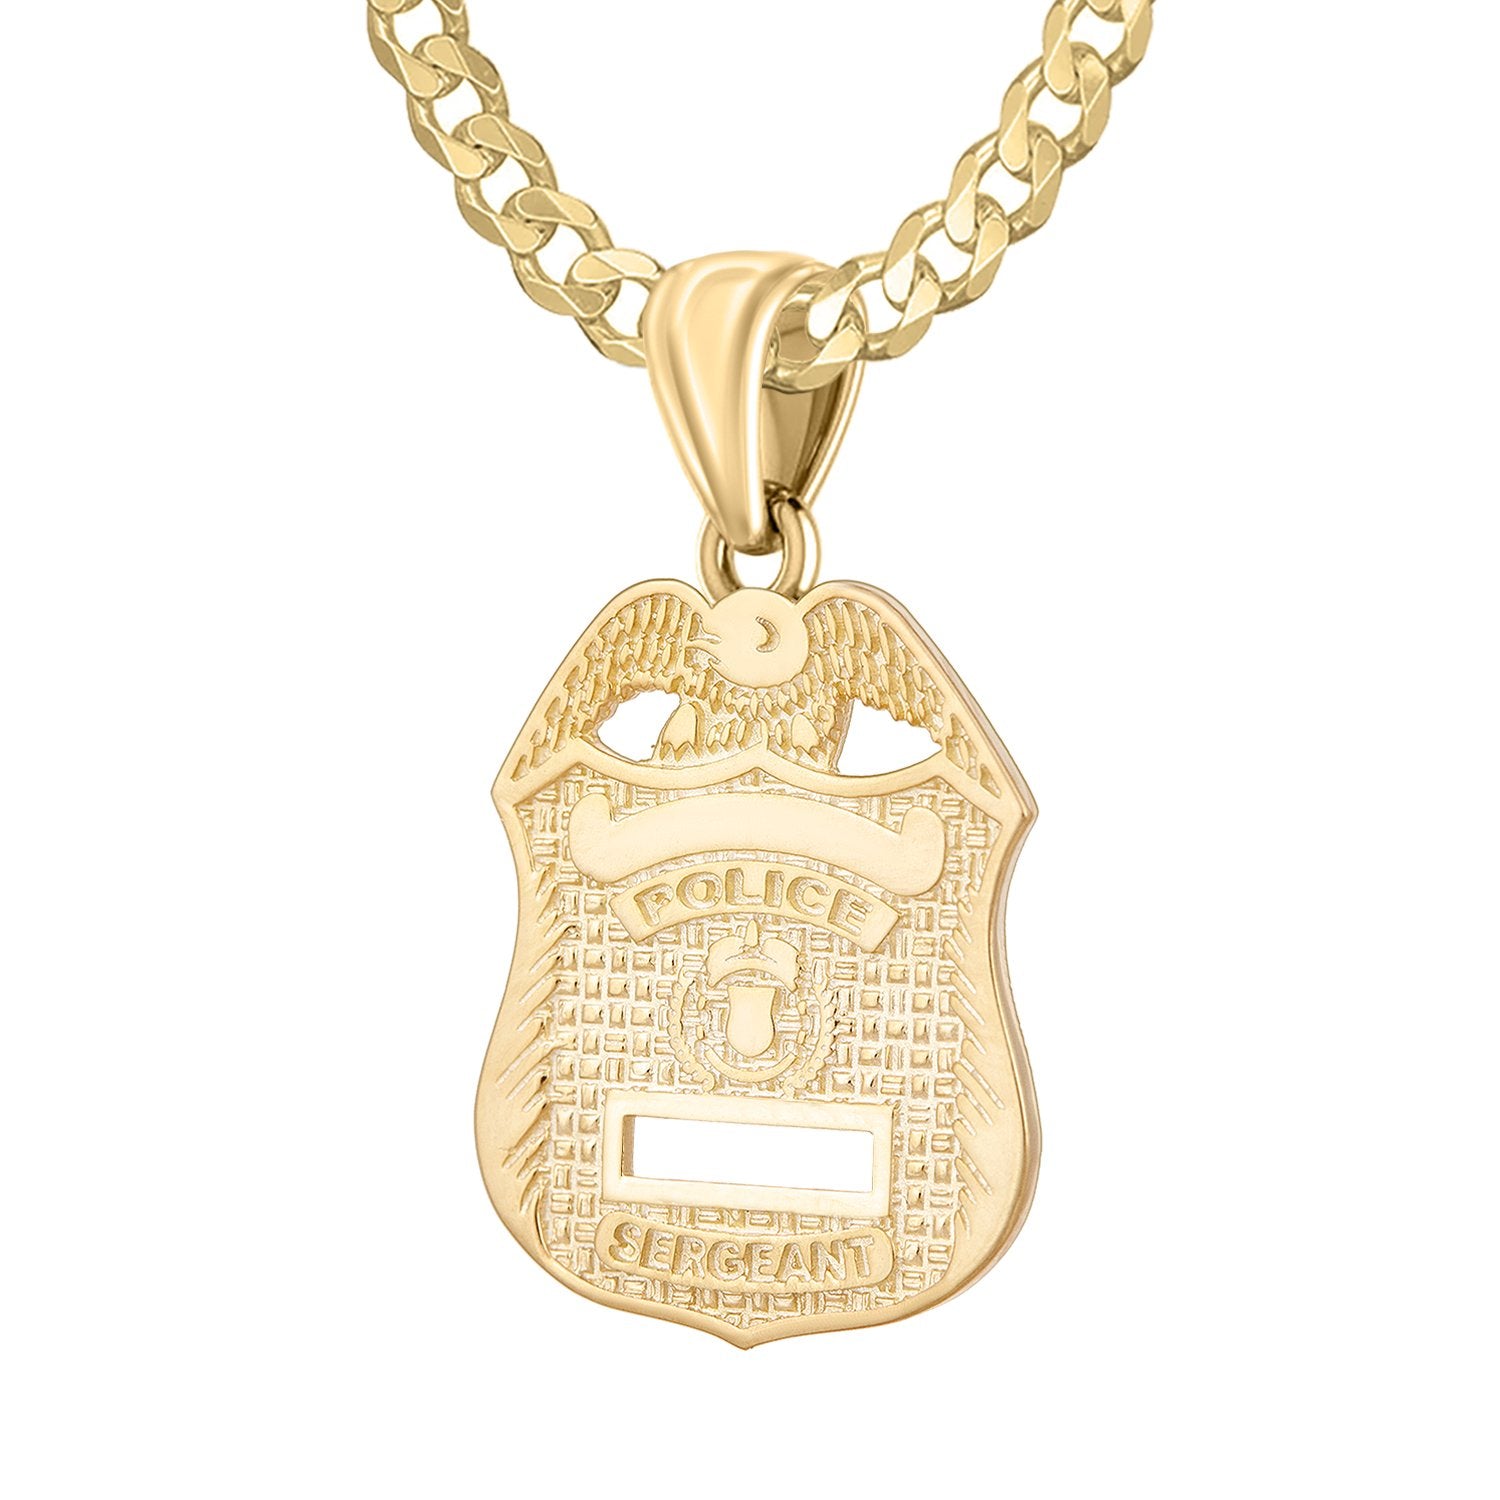 Police Badge Necklace In Gold For Men - 3.6mm Curb Chain